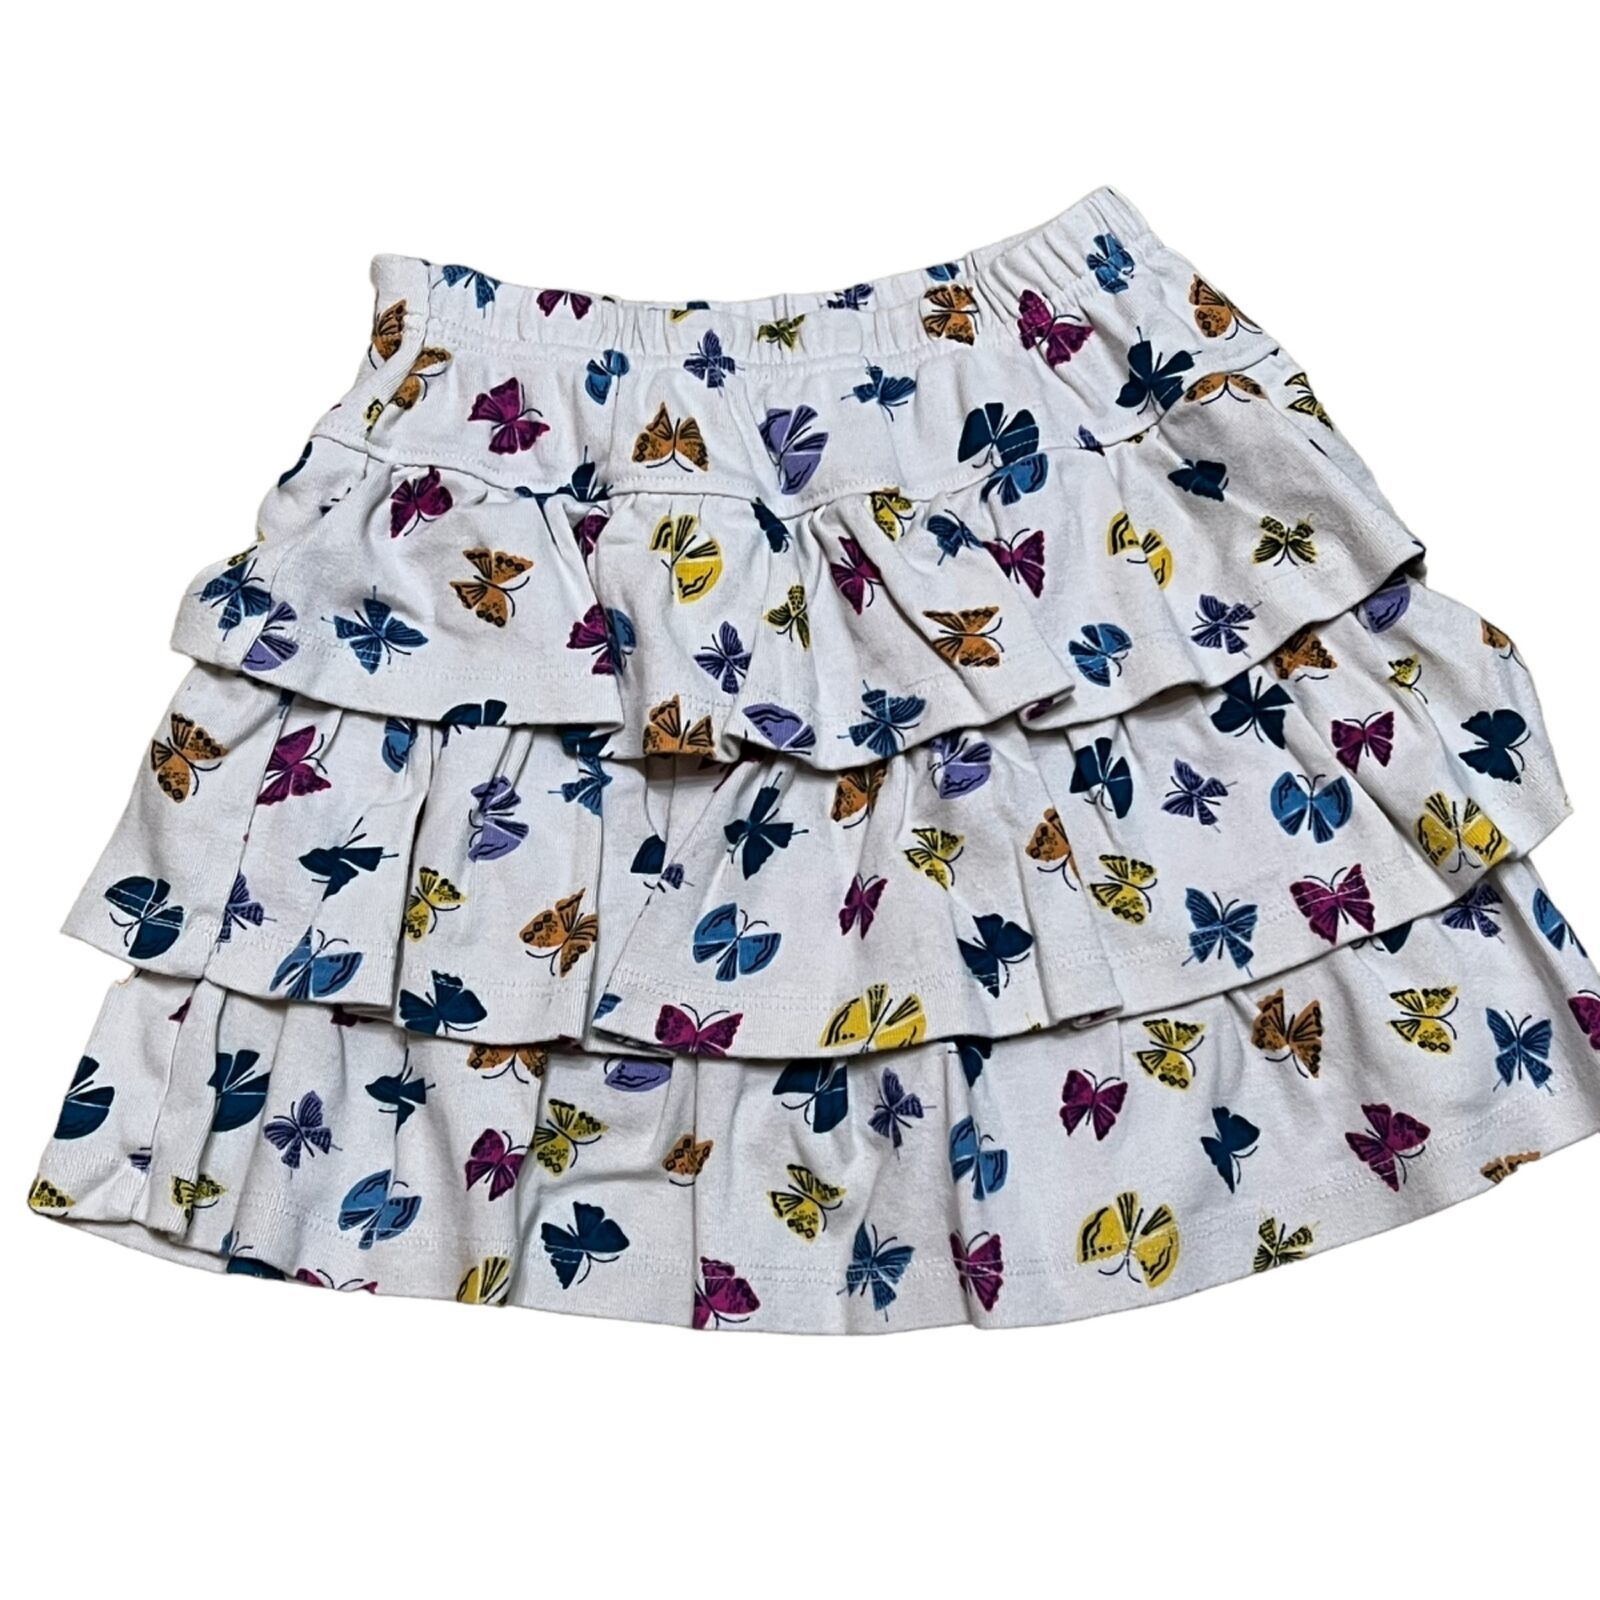 Primary image for Hanna Andersson Girls Butterfly Print Skort Sz 8